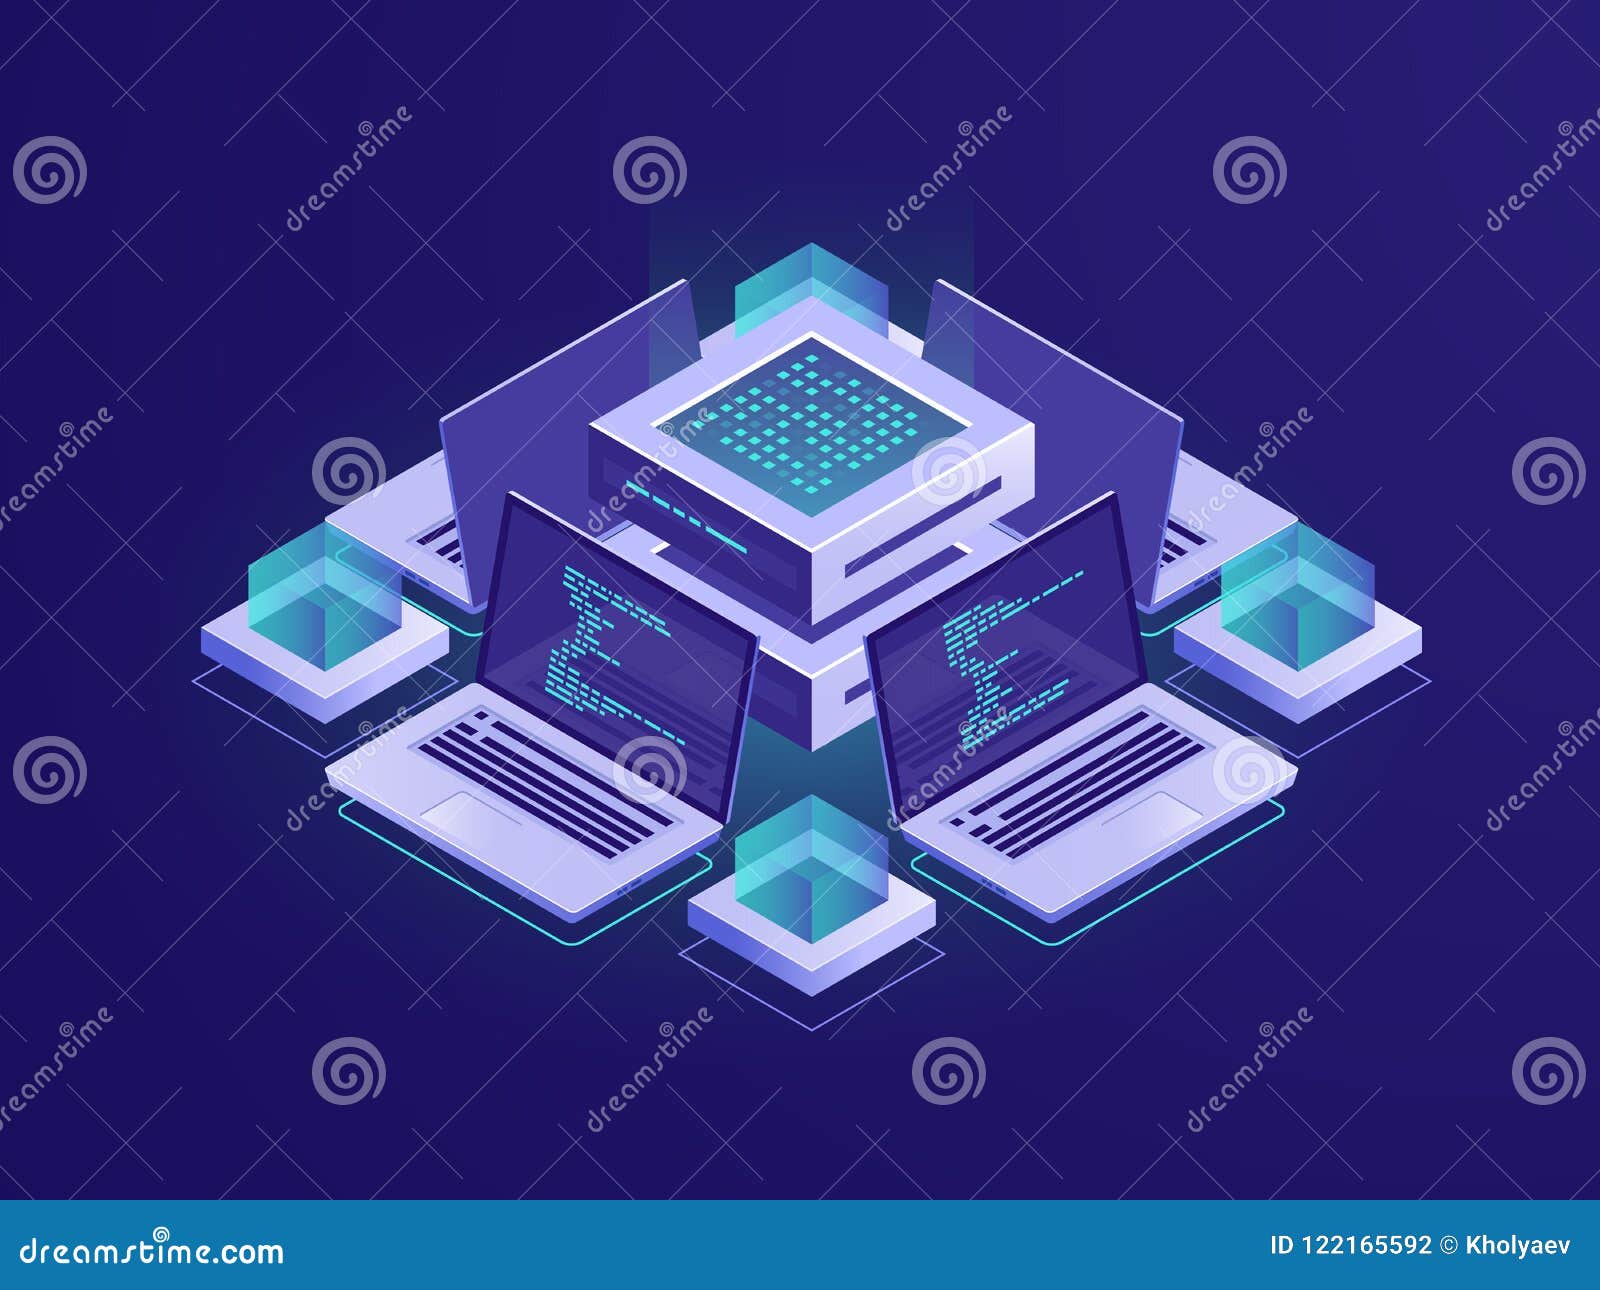 artificial intelligence isometric icon, server room, datacenter and database concept, code repository access, programm